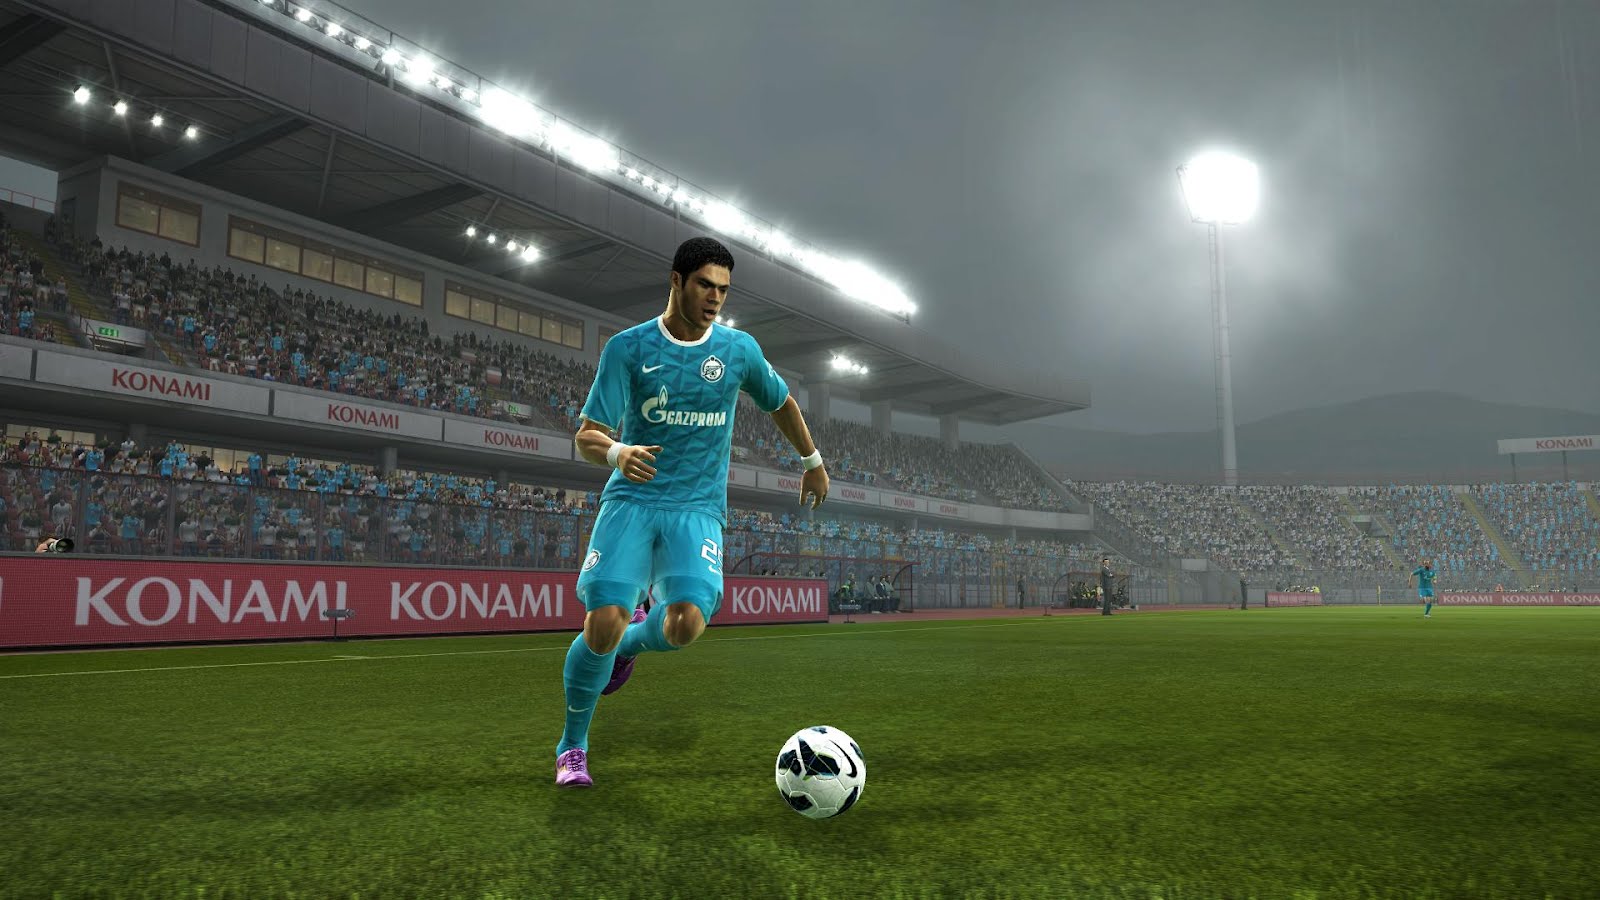 PES 2012 PESEdit.com 2012 Patch 3.4 + EURO 2012 Patch Add-on 1.0 + 1.1 +  1.2 ~